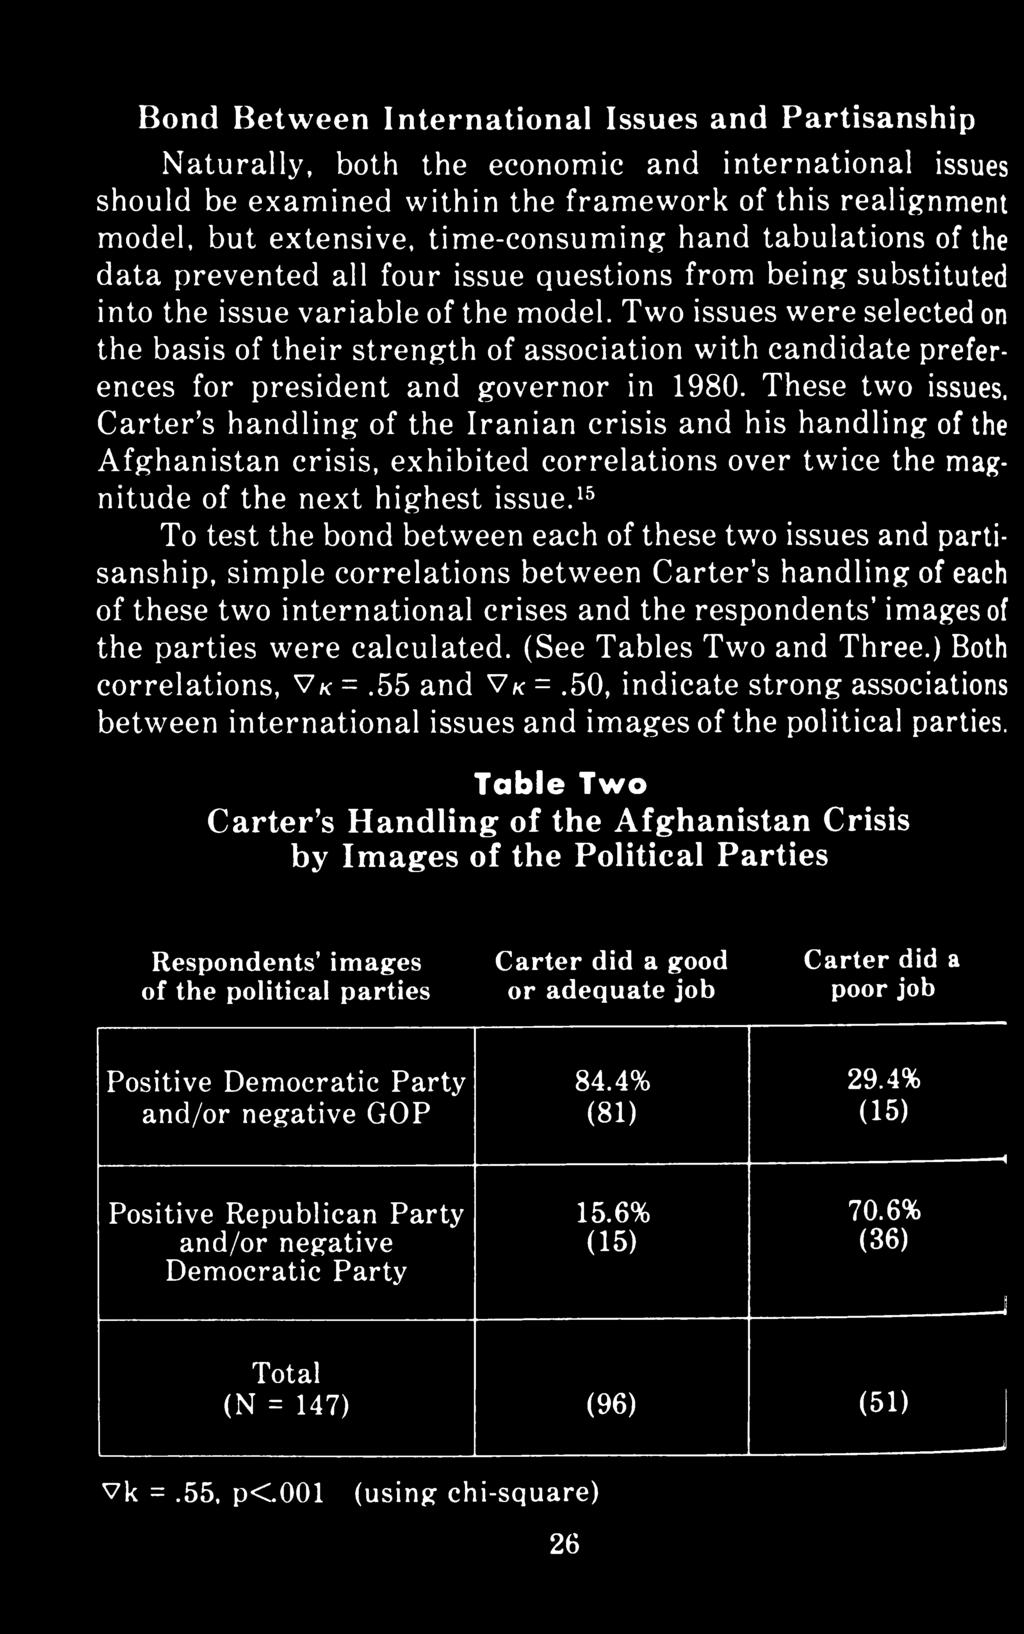 15 To test the bond between each of these two issues and partisanship, simple correlations between Carter s handling of each of these two international crises and the respondents images of the